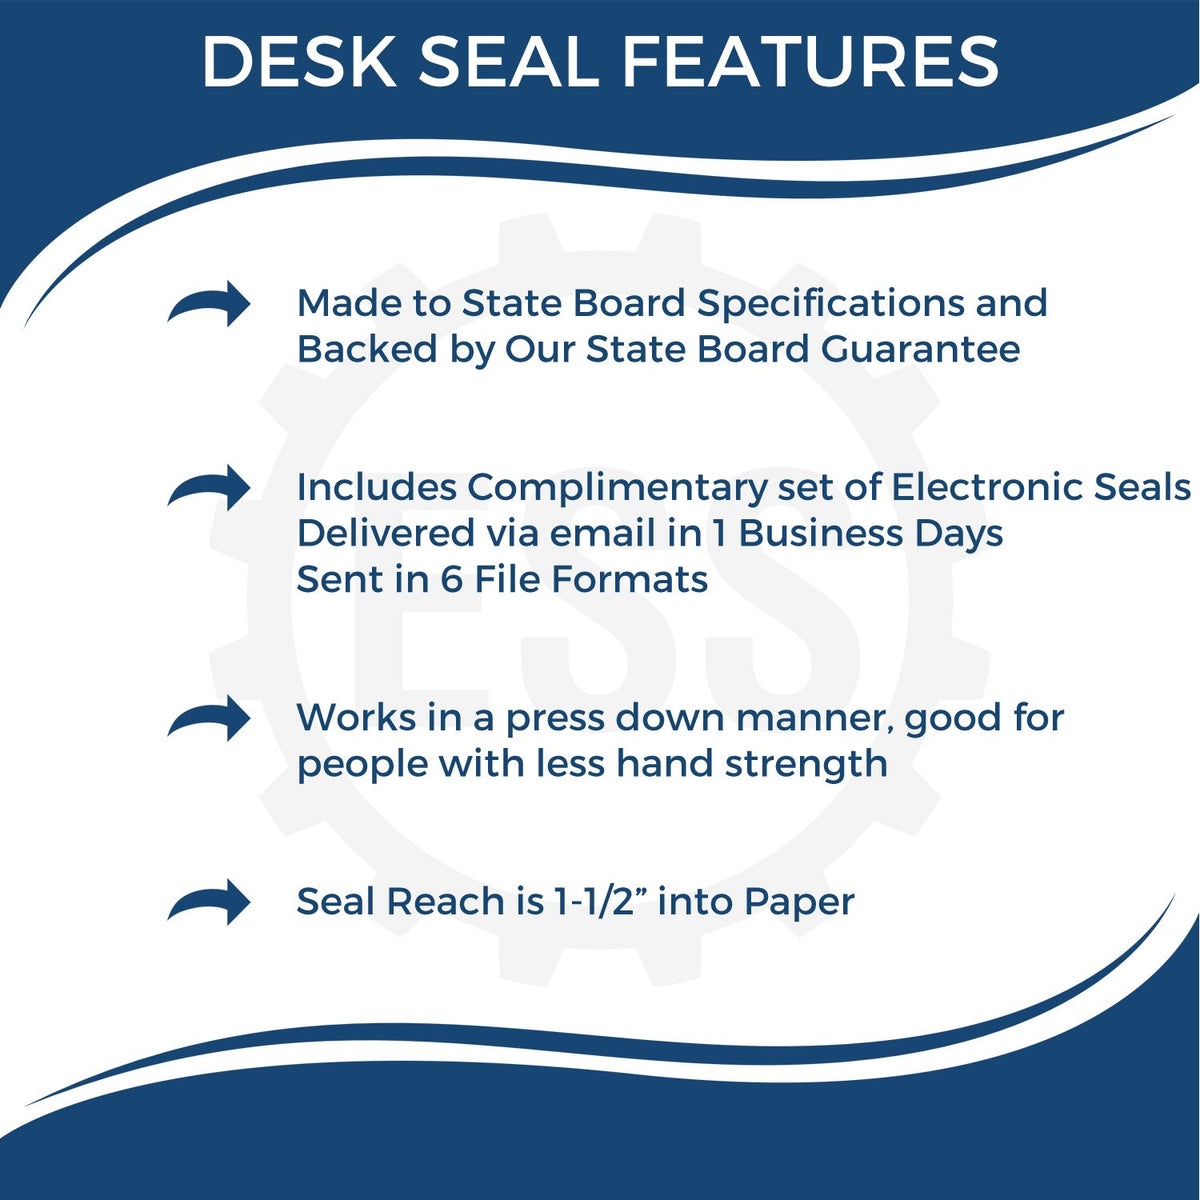 A picture of an infographic highlighting the selling points for the Louisiana Geologist Desk Seal